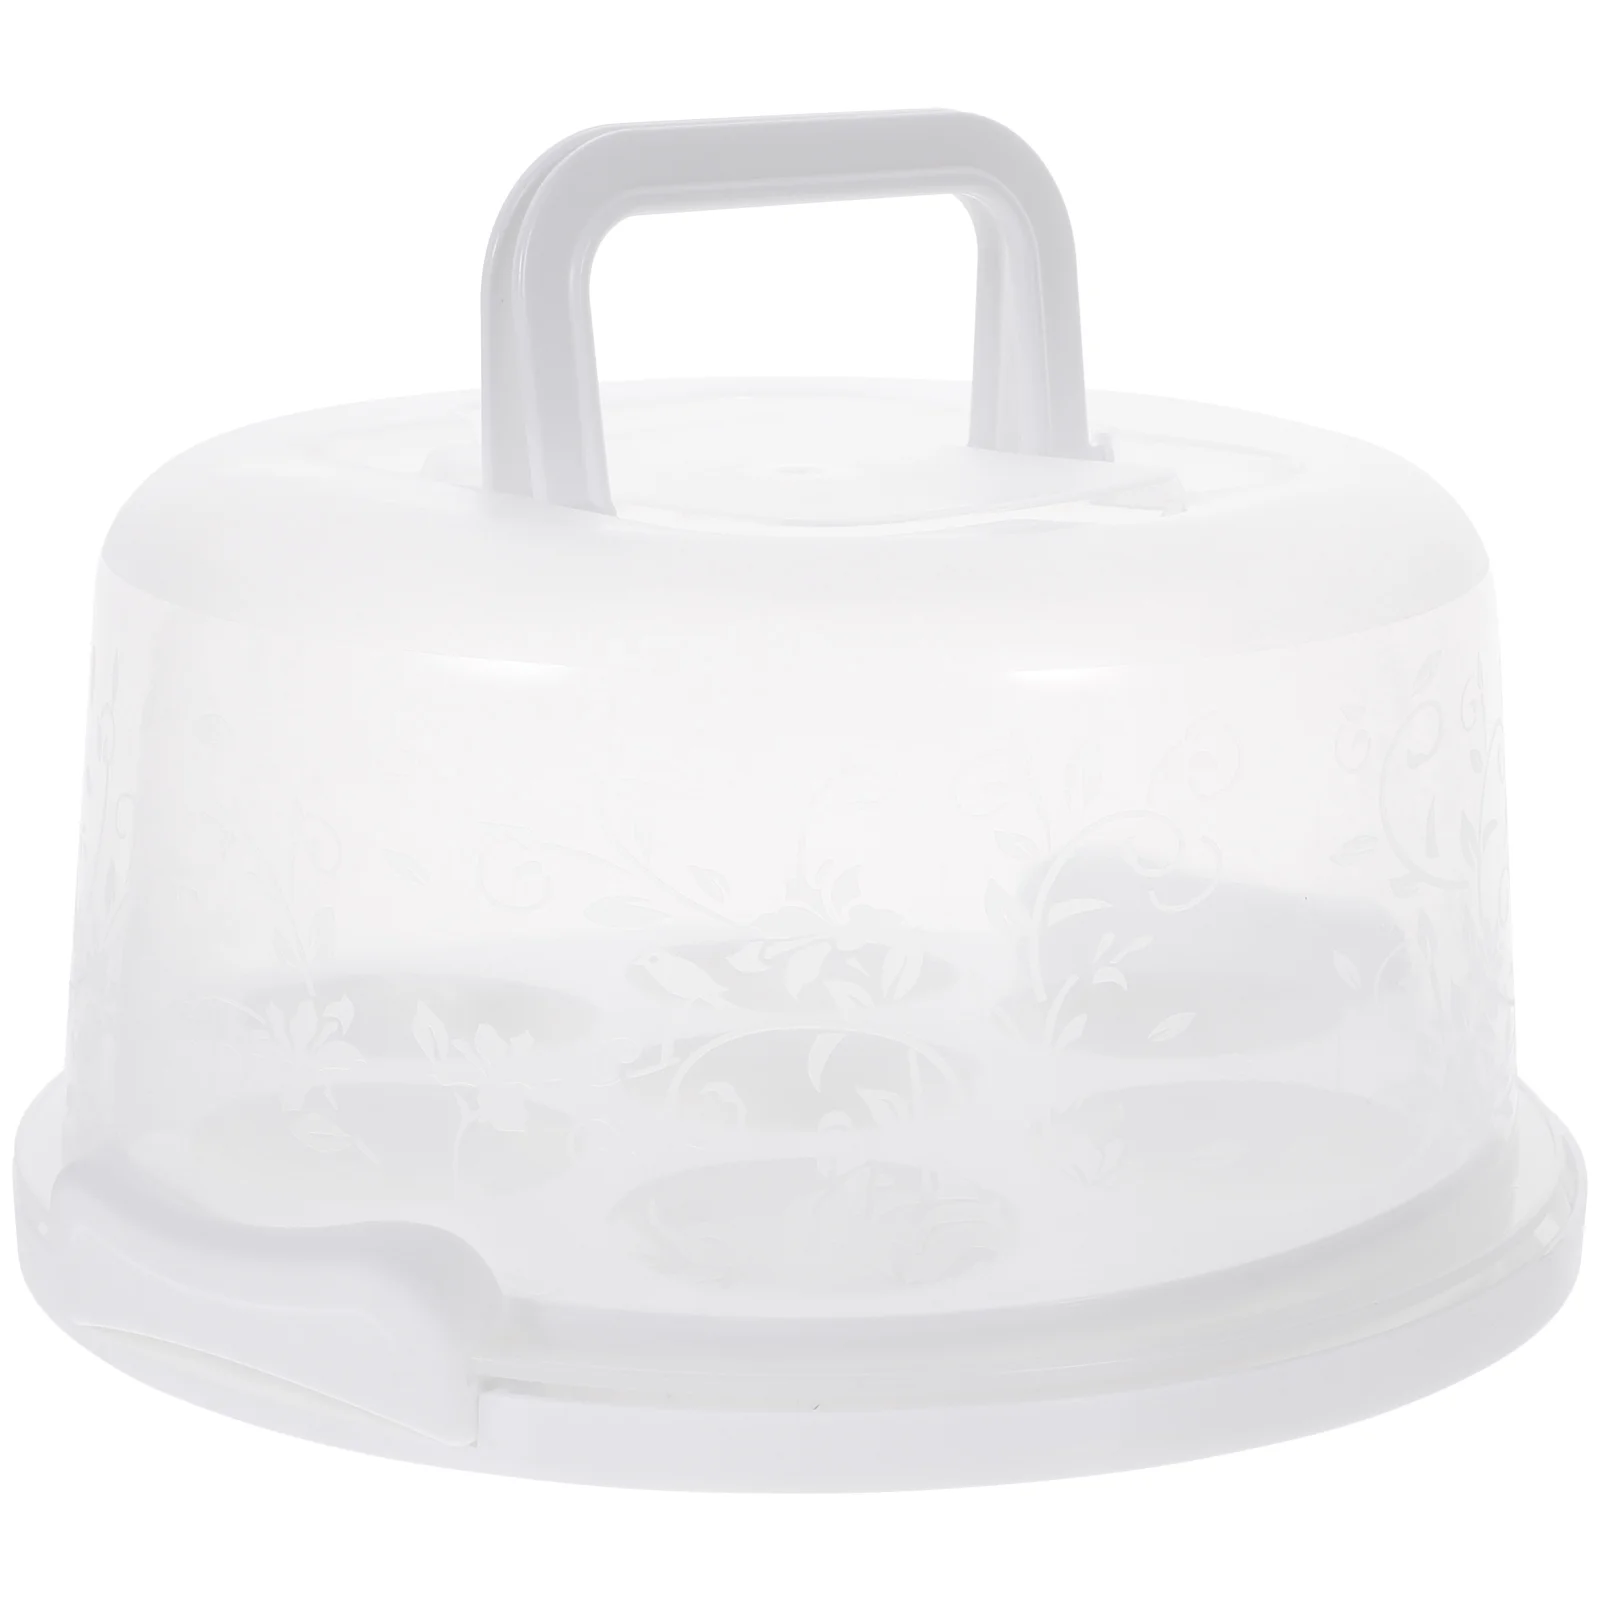 

Cupcake Carrier Boxlid Boxes Tart Packing Baking Keeper Dessert Egg Muffin Cake Partyround Supplies Portablepie Container Cookie